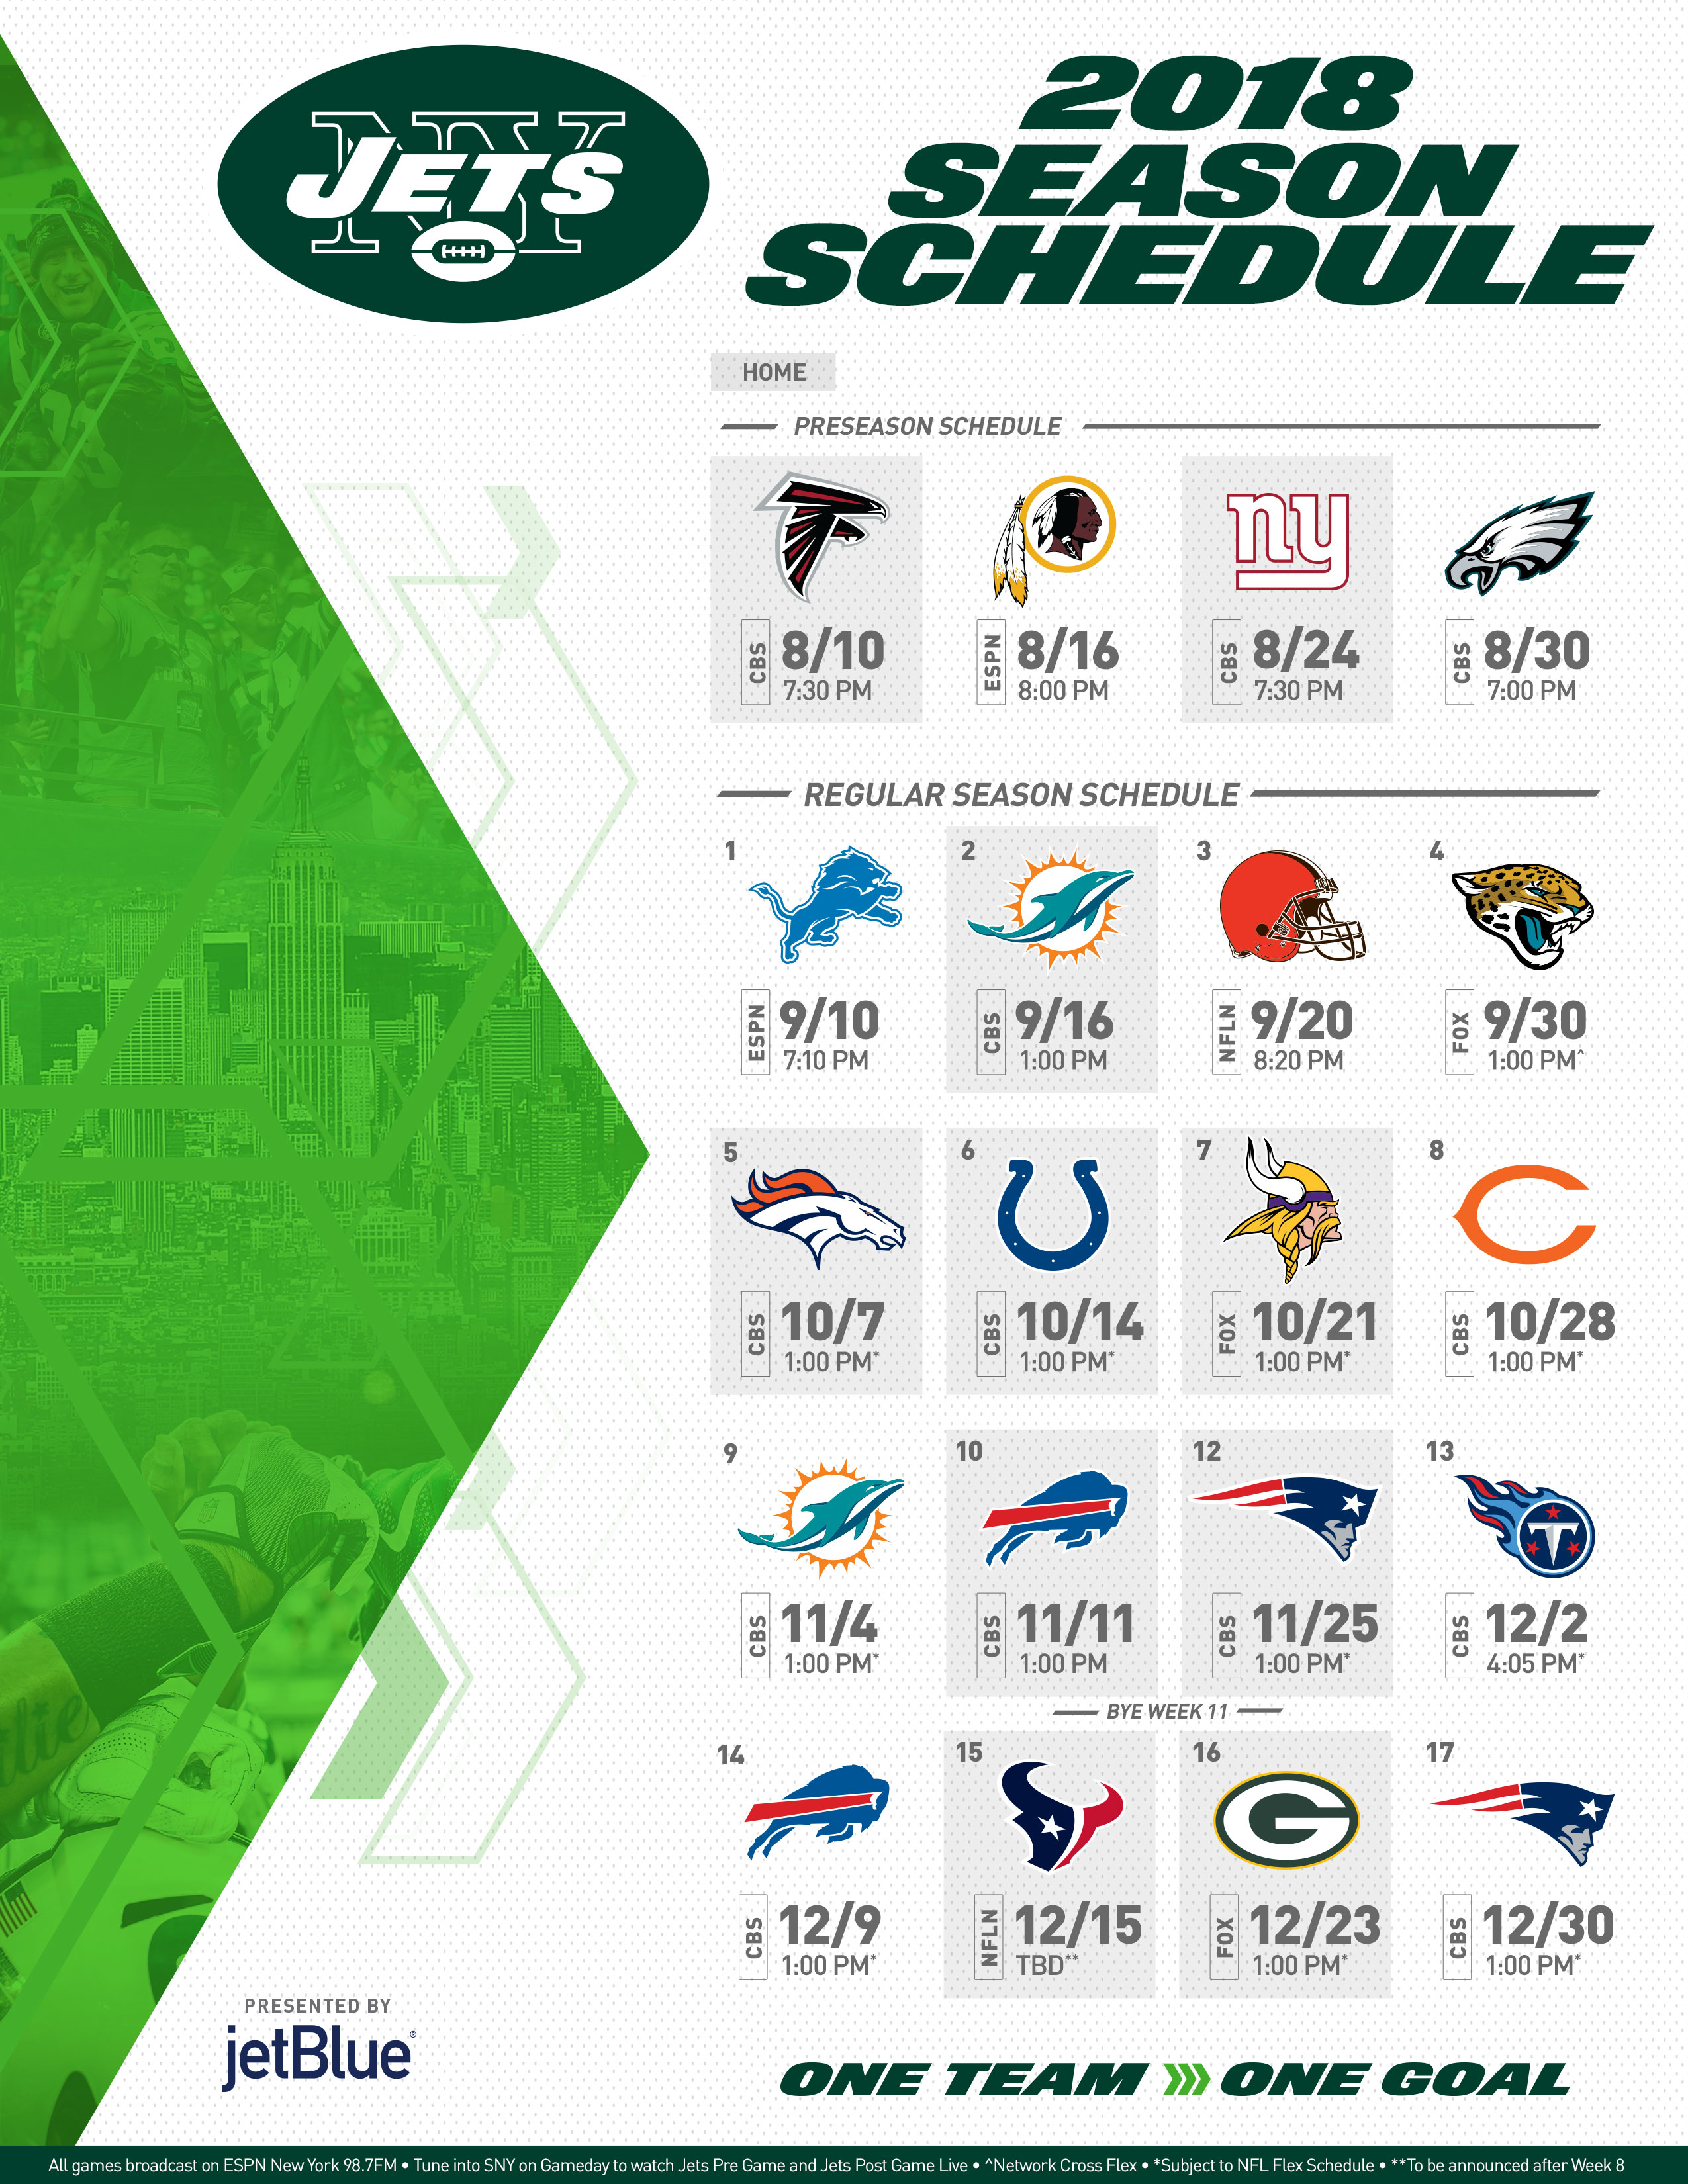 Jets Schedule Nfl : New York Jets: 5 Toughest Games on 2016 NFL Schedule - Page 2 / It will be